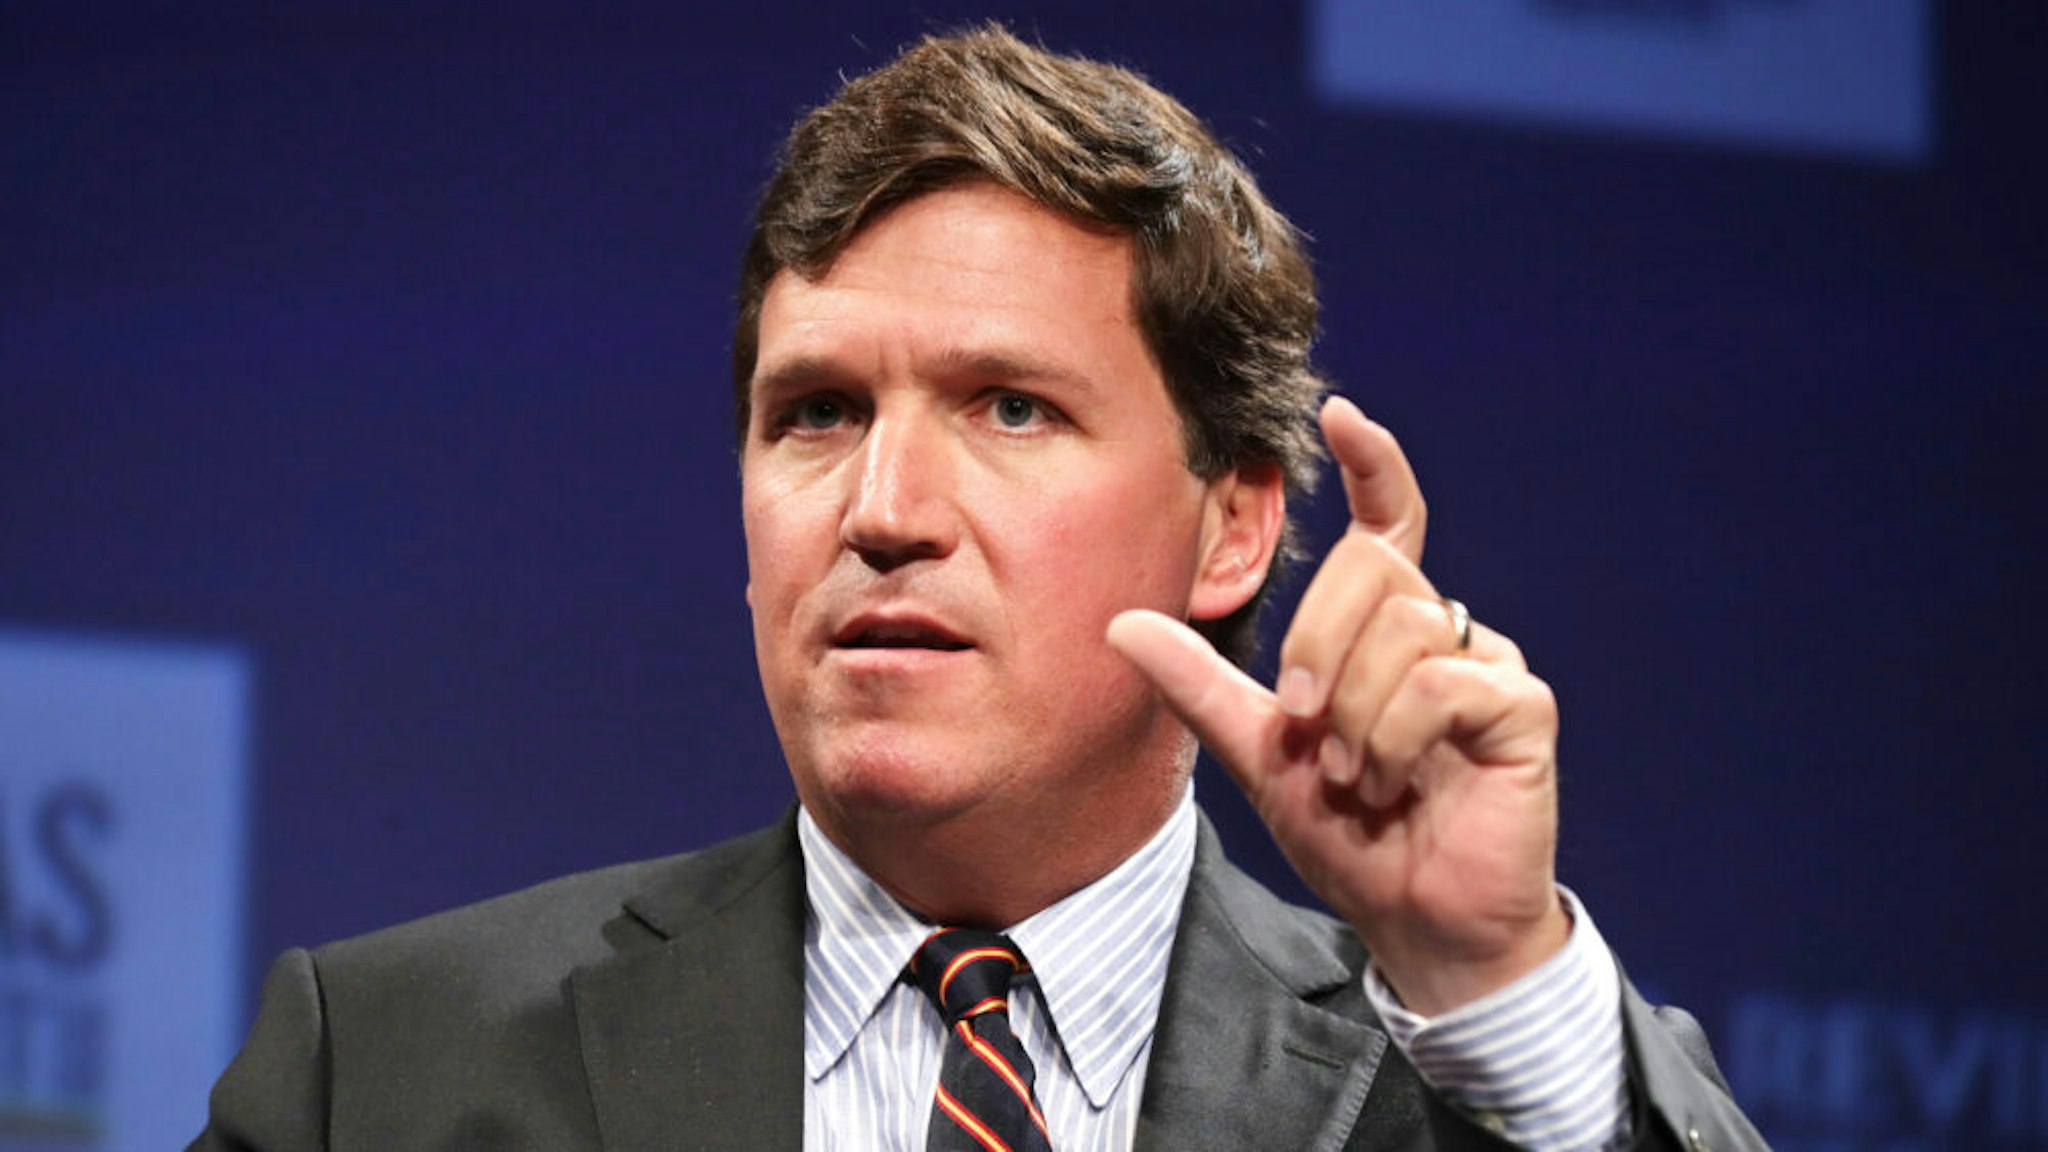 WASHINGTON, DC - MARCH 29: Fox News host Tucker Carlson discusses 'Populism and the Right' during the National Review Institute's Ideas Summit at the Mandarin Oriental Hotel March 29, 2019 in Washington, DC. Carlson talked about a large variety of topics including dropping testosterone levels, increasing rates of suicide, unemployment, drug addiction and social hierarchy at the summit, which had the theme 'The Case for the American Experiment.'